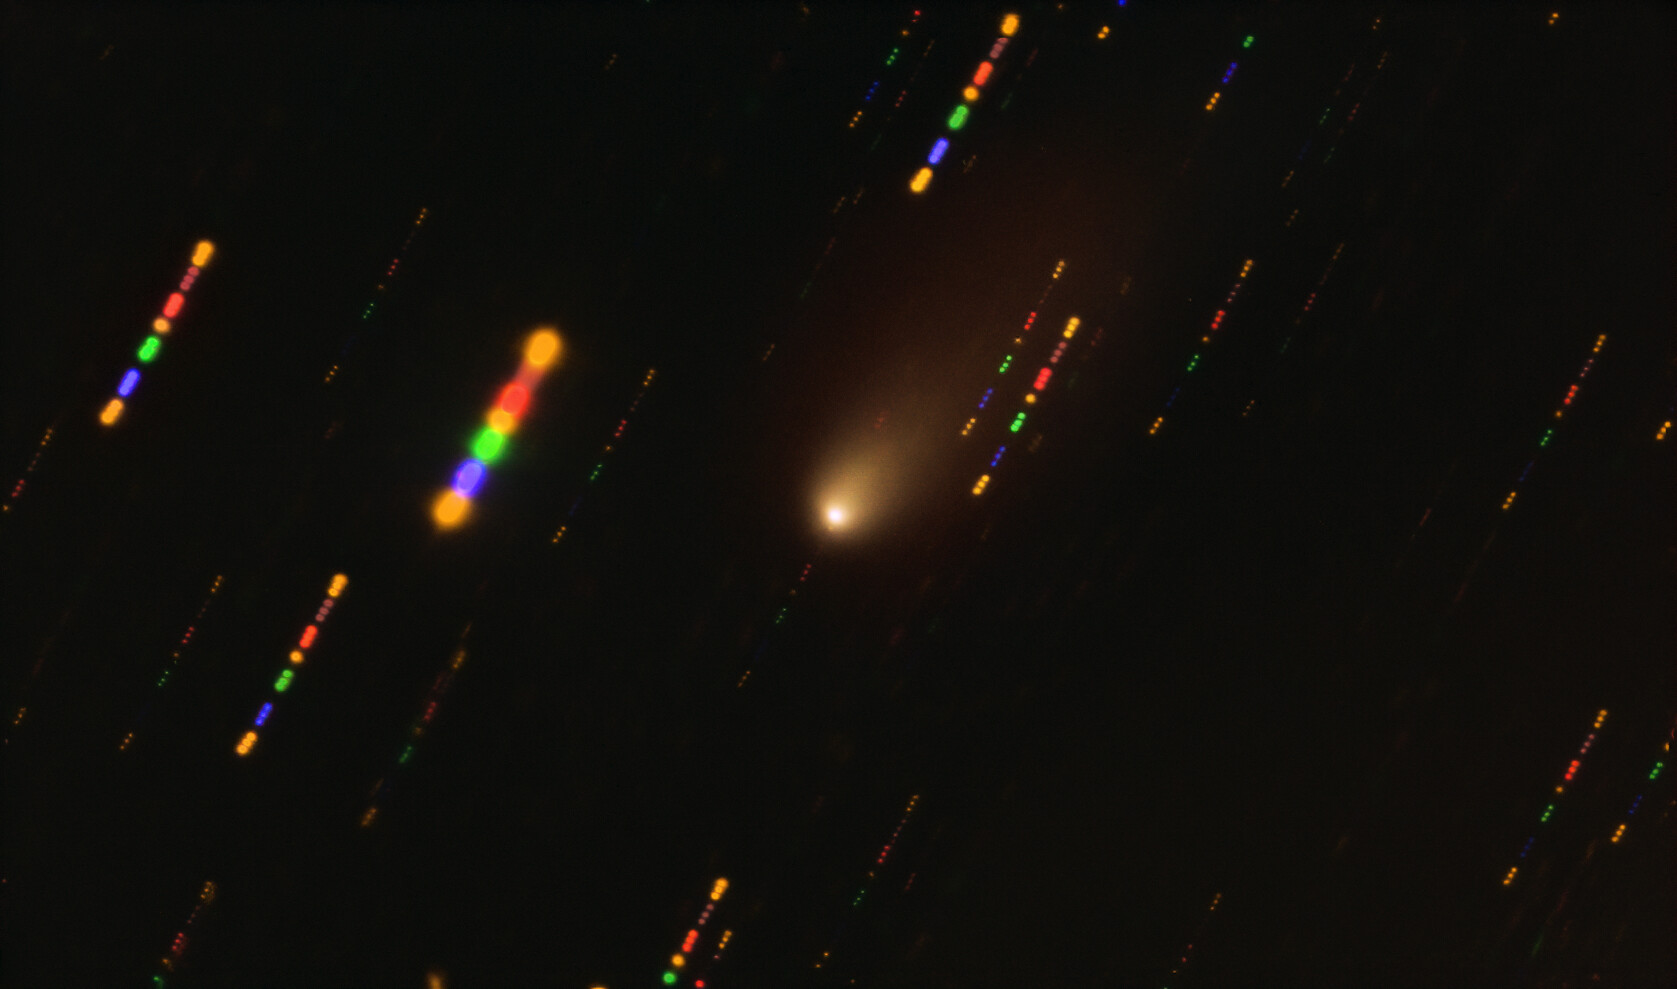 <p>This image was taken with the FORS2 instrument on ESO’s Very Large Telescope in late 2019, when comet 2I/Borisov passed near the Sun.  Since the comet was travelling at breakneck speed, around 175 000 kilometres per hour, the background stars appeared as streaks of light as the telescope followed the comet’s trajectory. The colours in these streaks give the image some disco flair and are the result of combining observations in different wavelength bands, highlighted by the various colours in this composite image. Credit: ESO/O. Hainaut</p>
